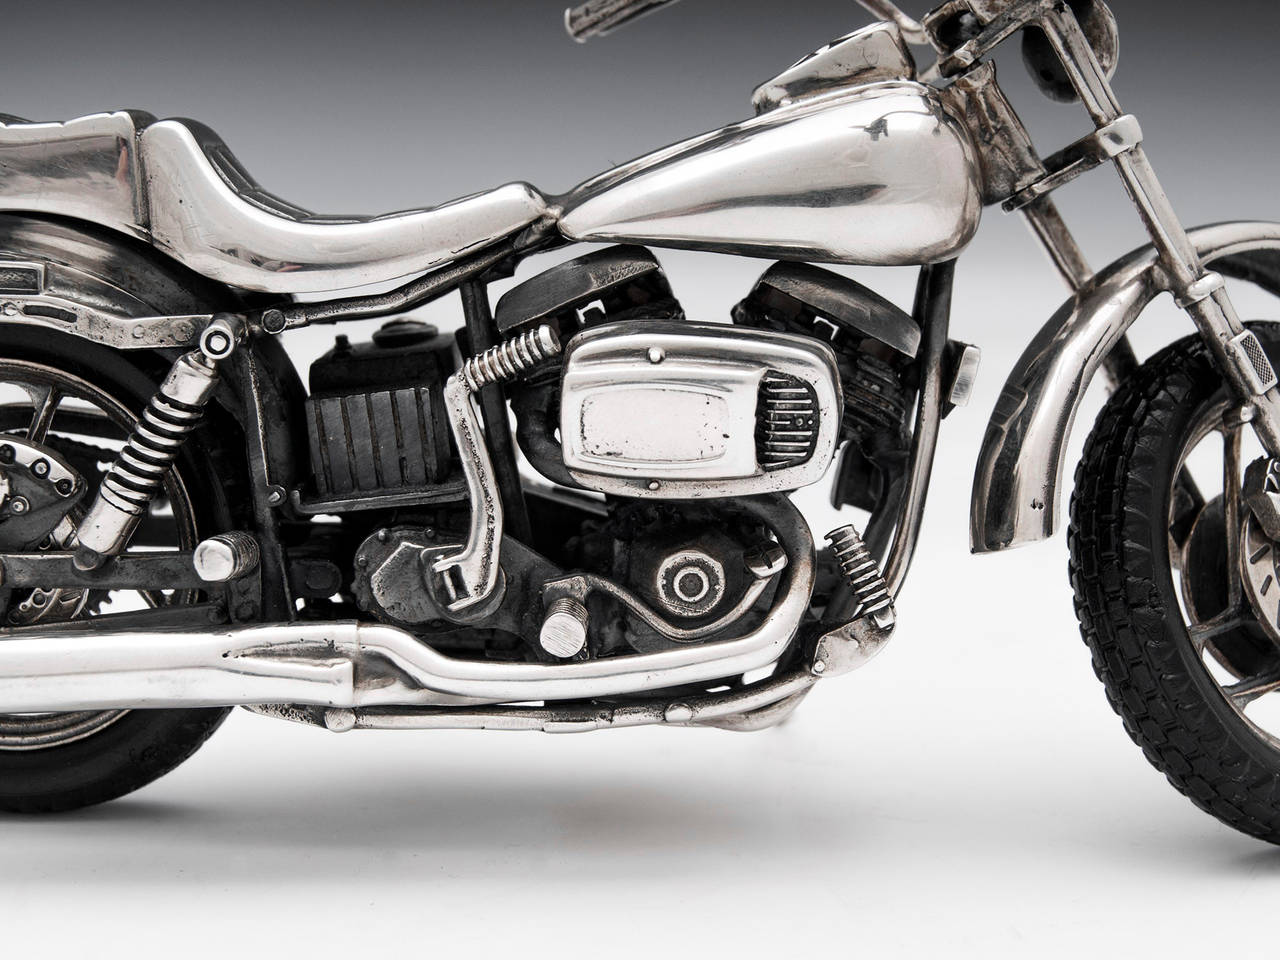 Sterling Silver Harley Davidson Motorcycle In Good Condition In Northampton, United Kingdom